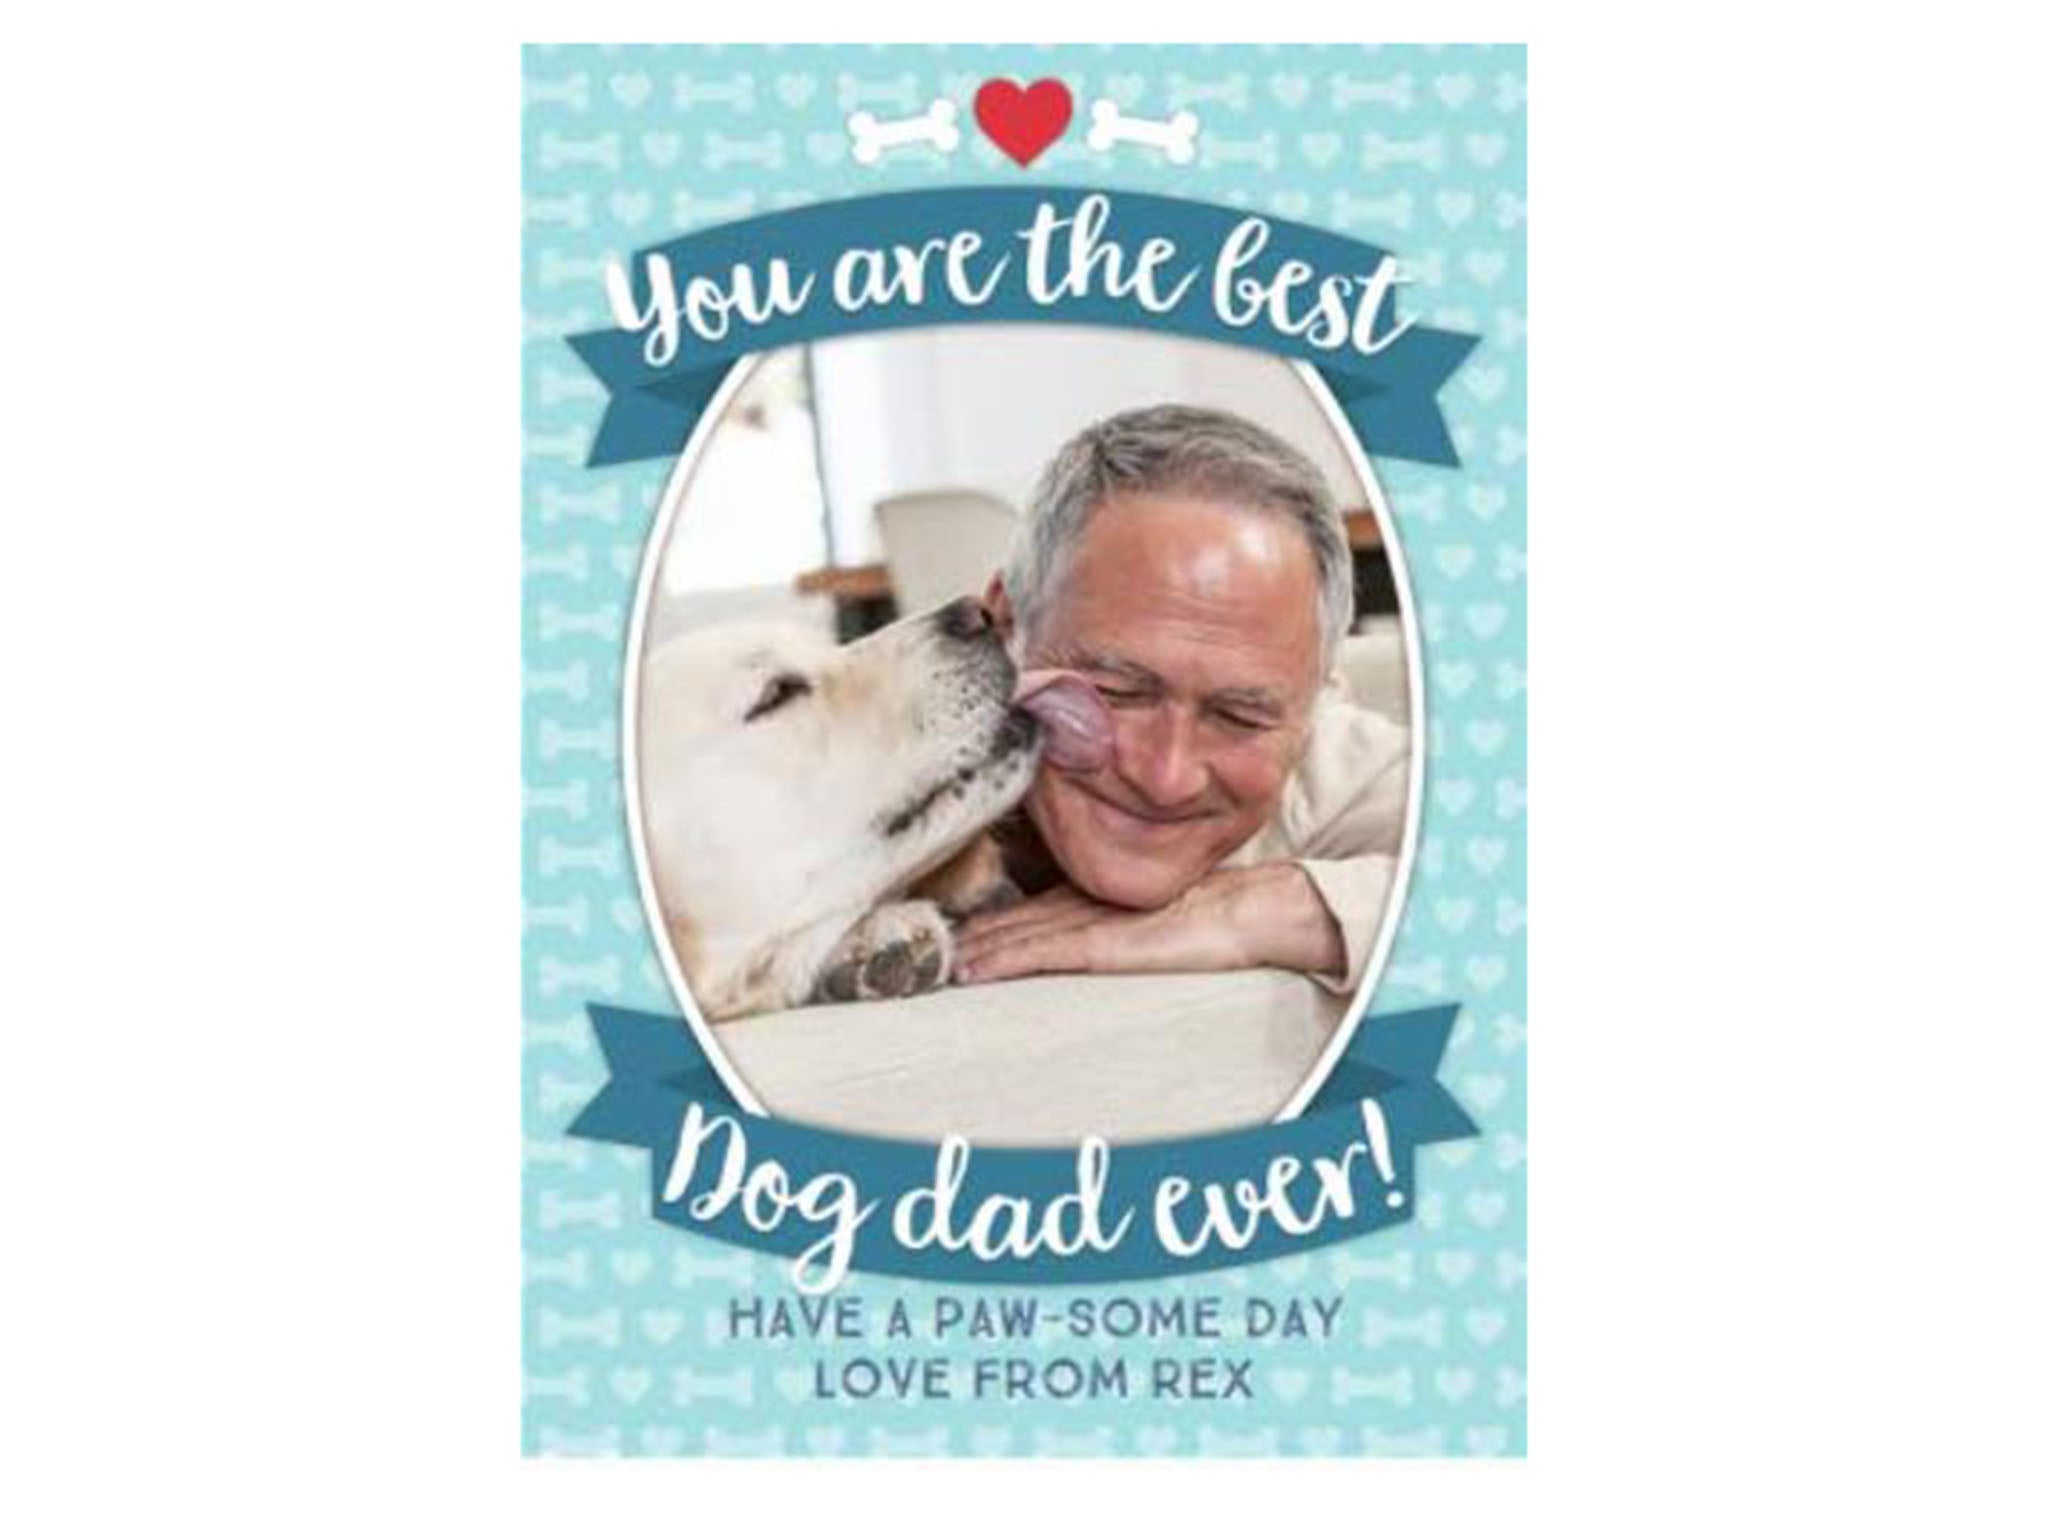 fathers-day-card-from-dog-indybest